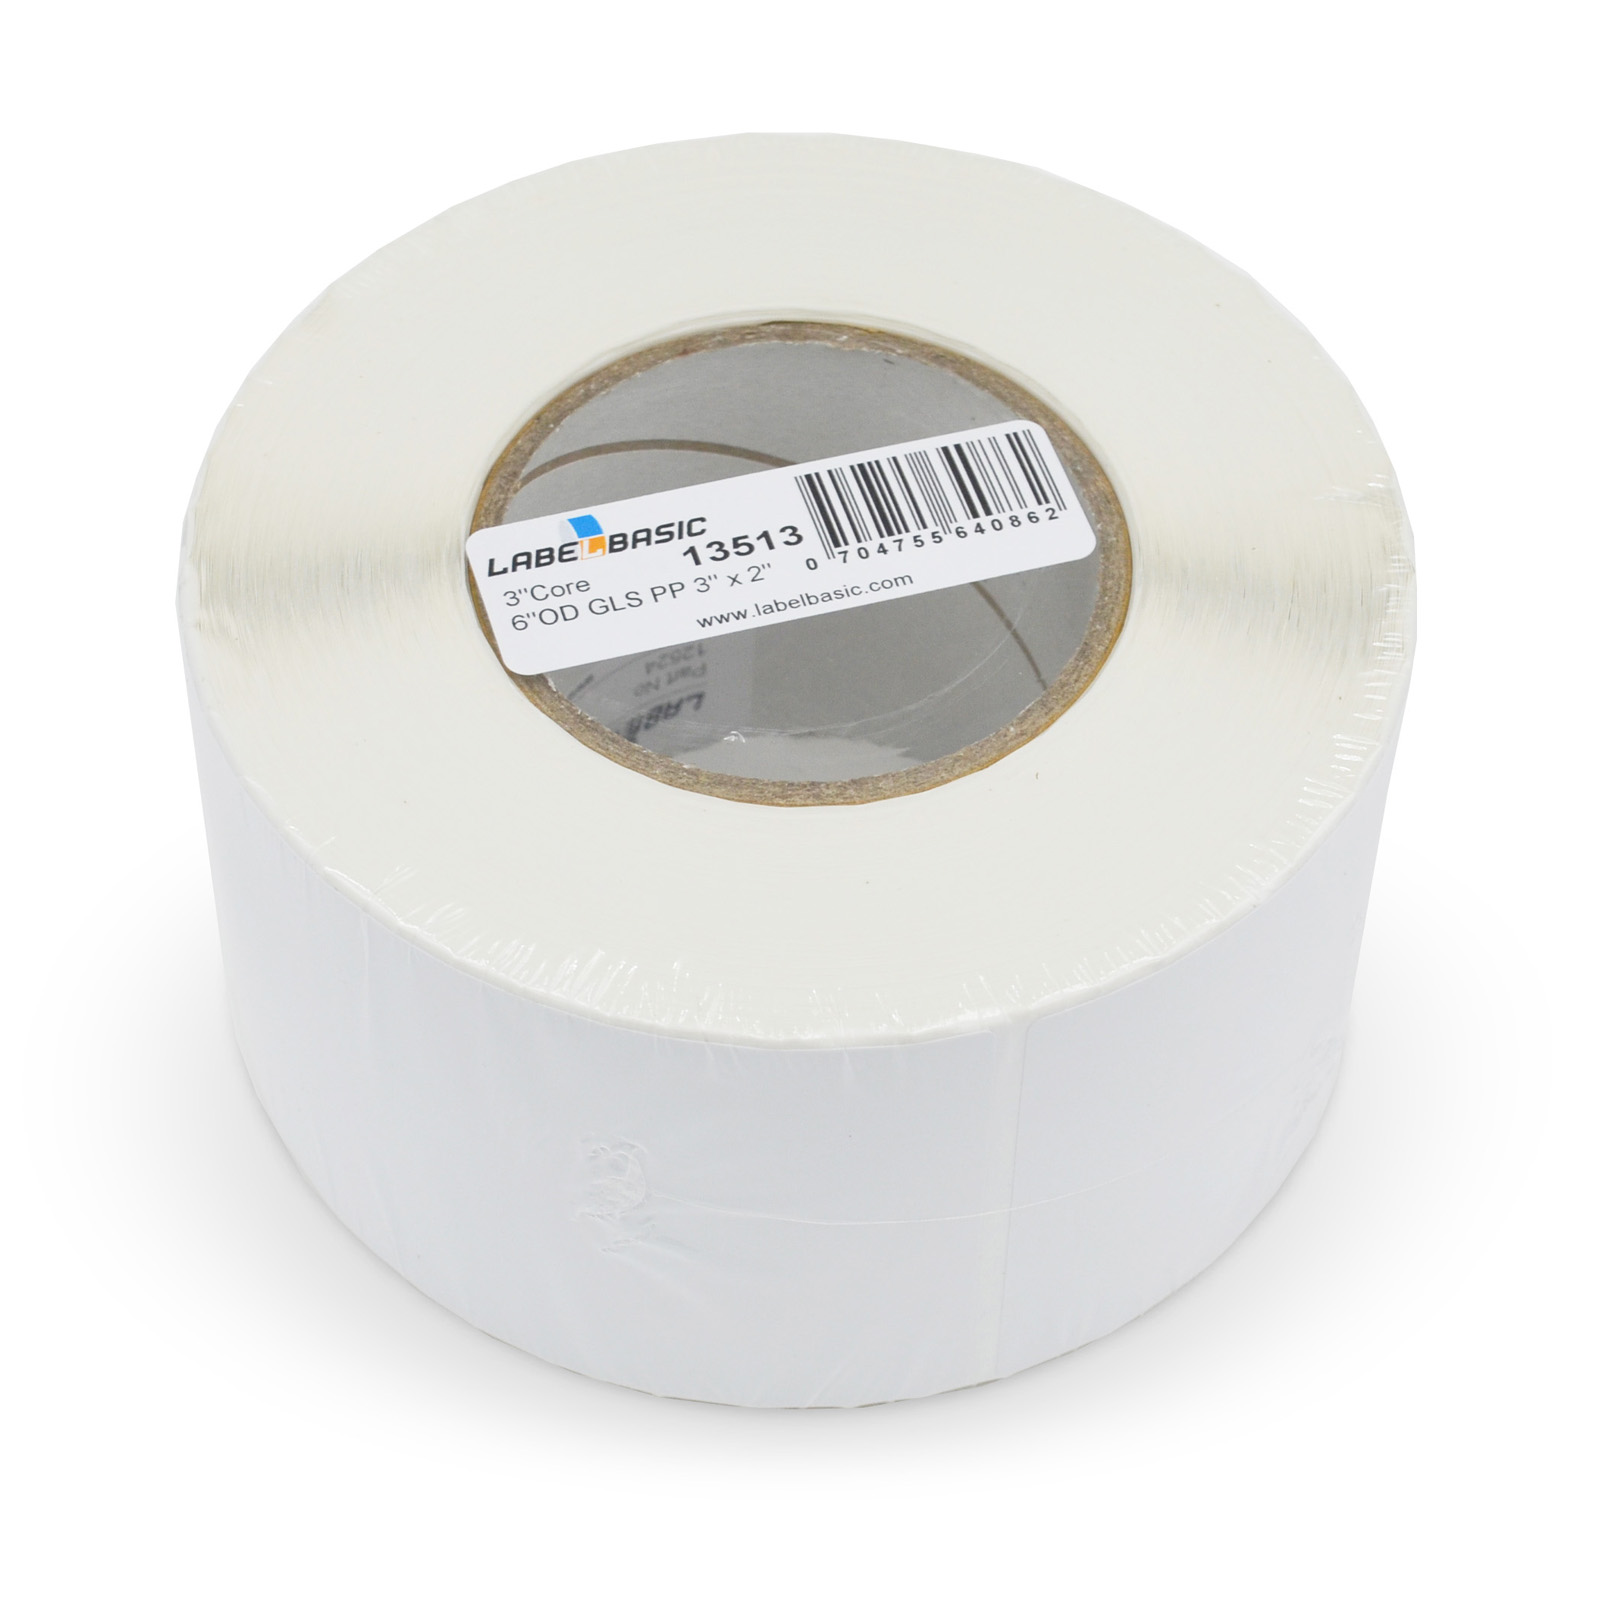 Labels for Primera LX910 3" x 2" 1200 Glossy Polypropylene Labels Per Roll - LabelBasic.com